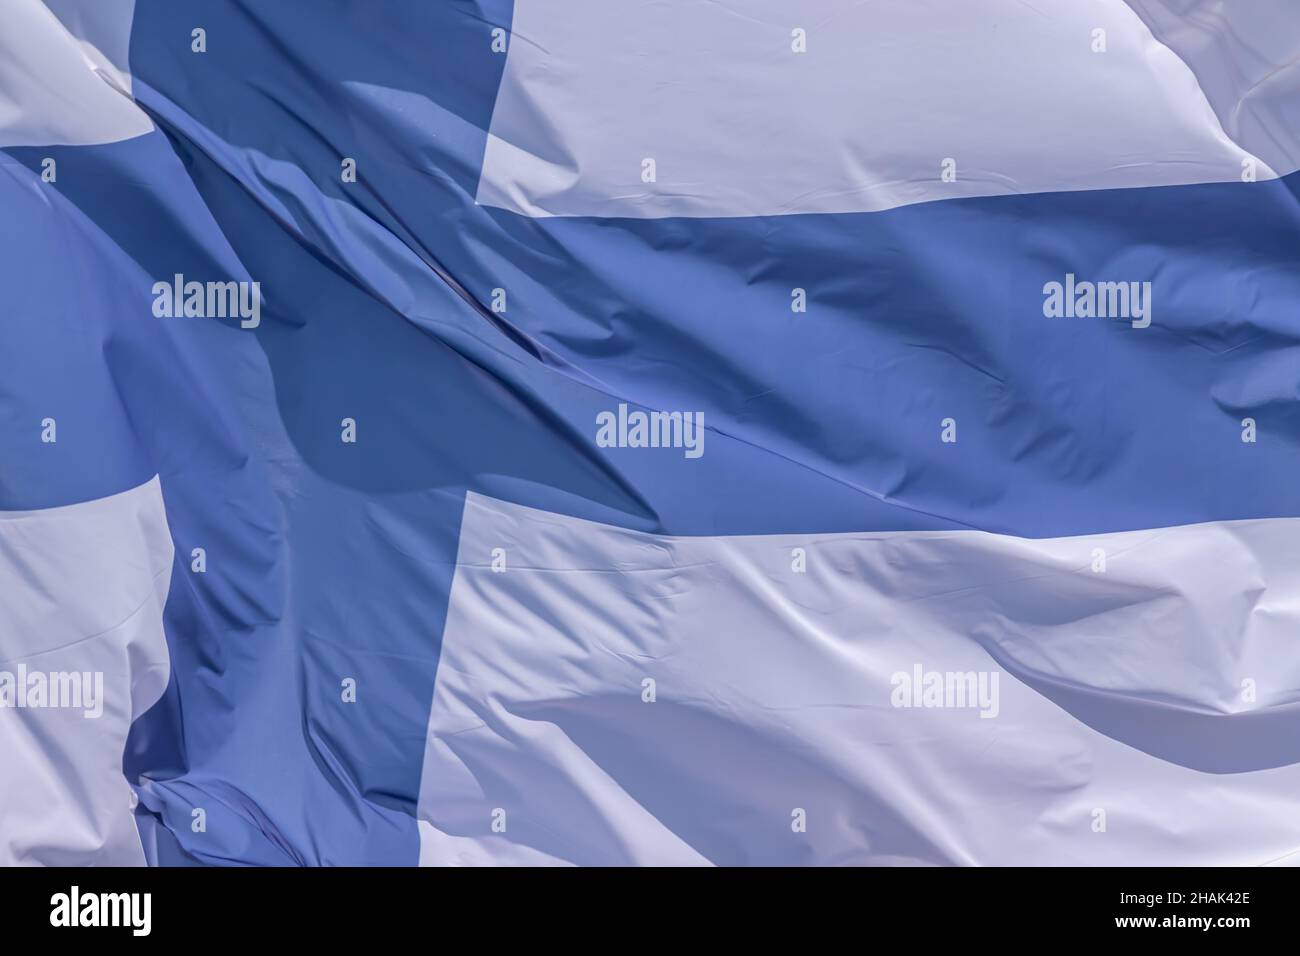 Part of Finnish national flag waving, close-up. Republic of Finland, FIN Stock Photo